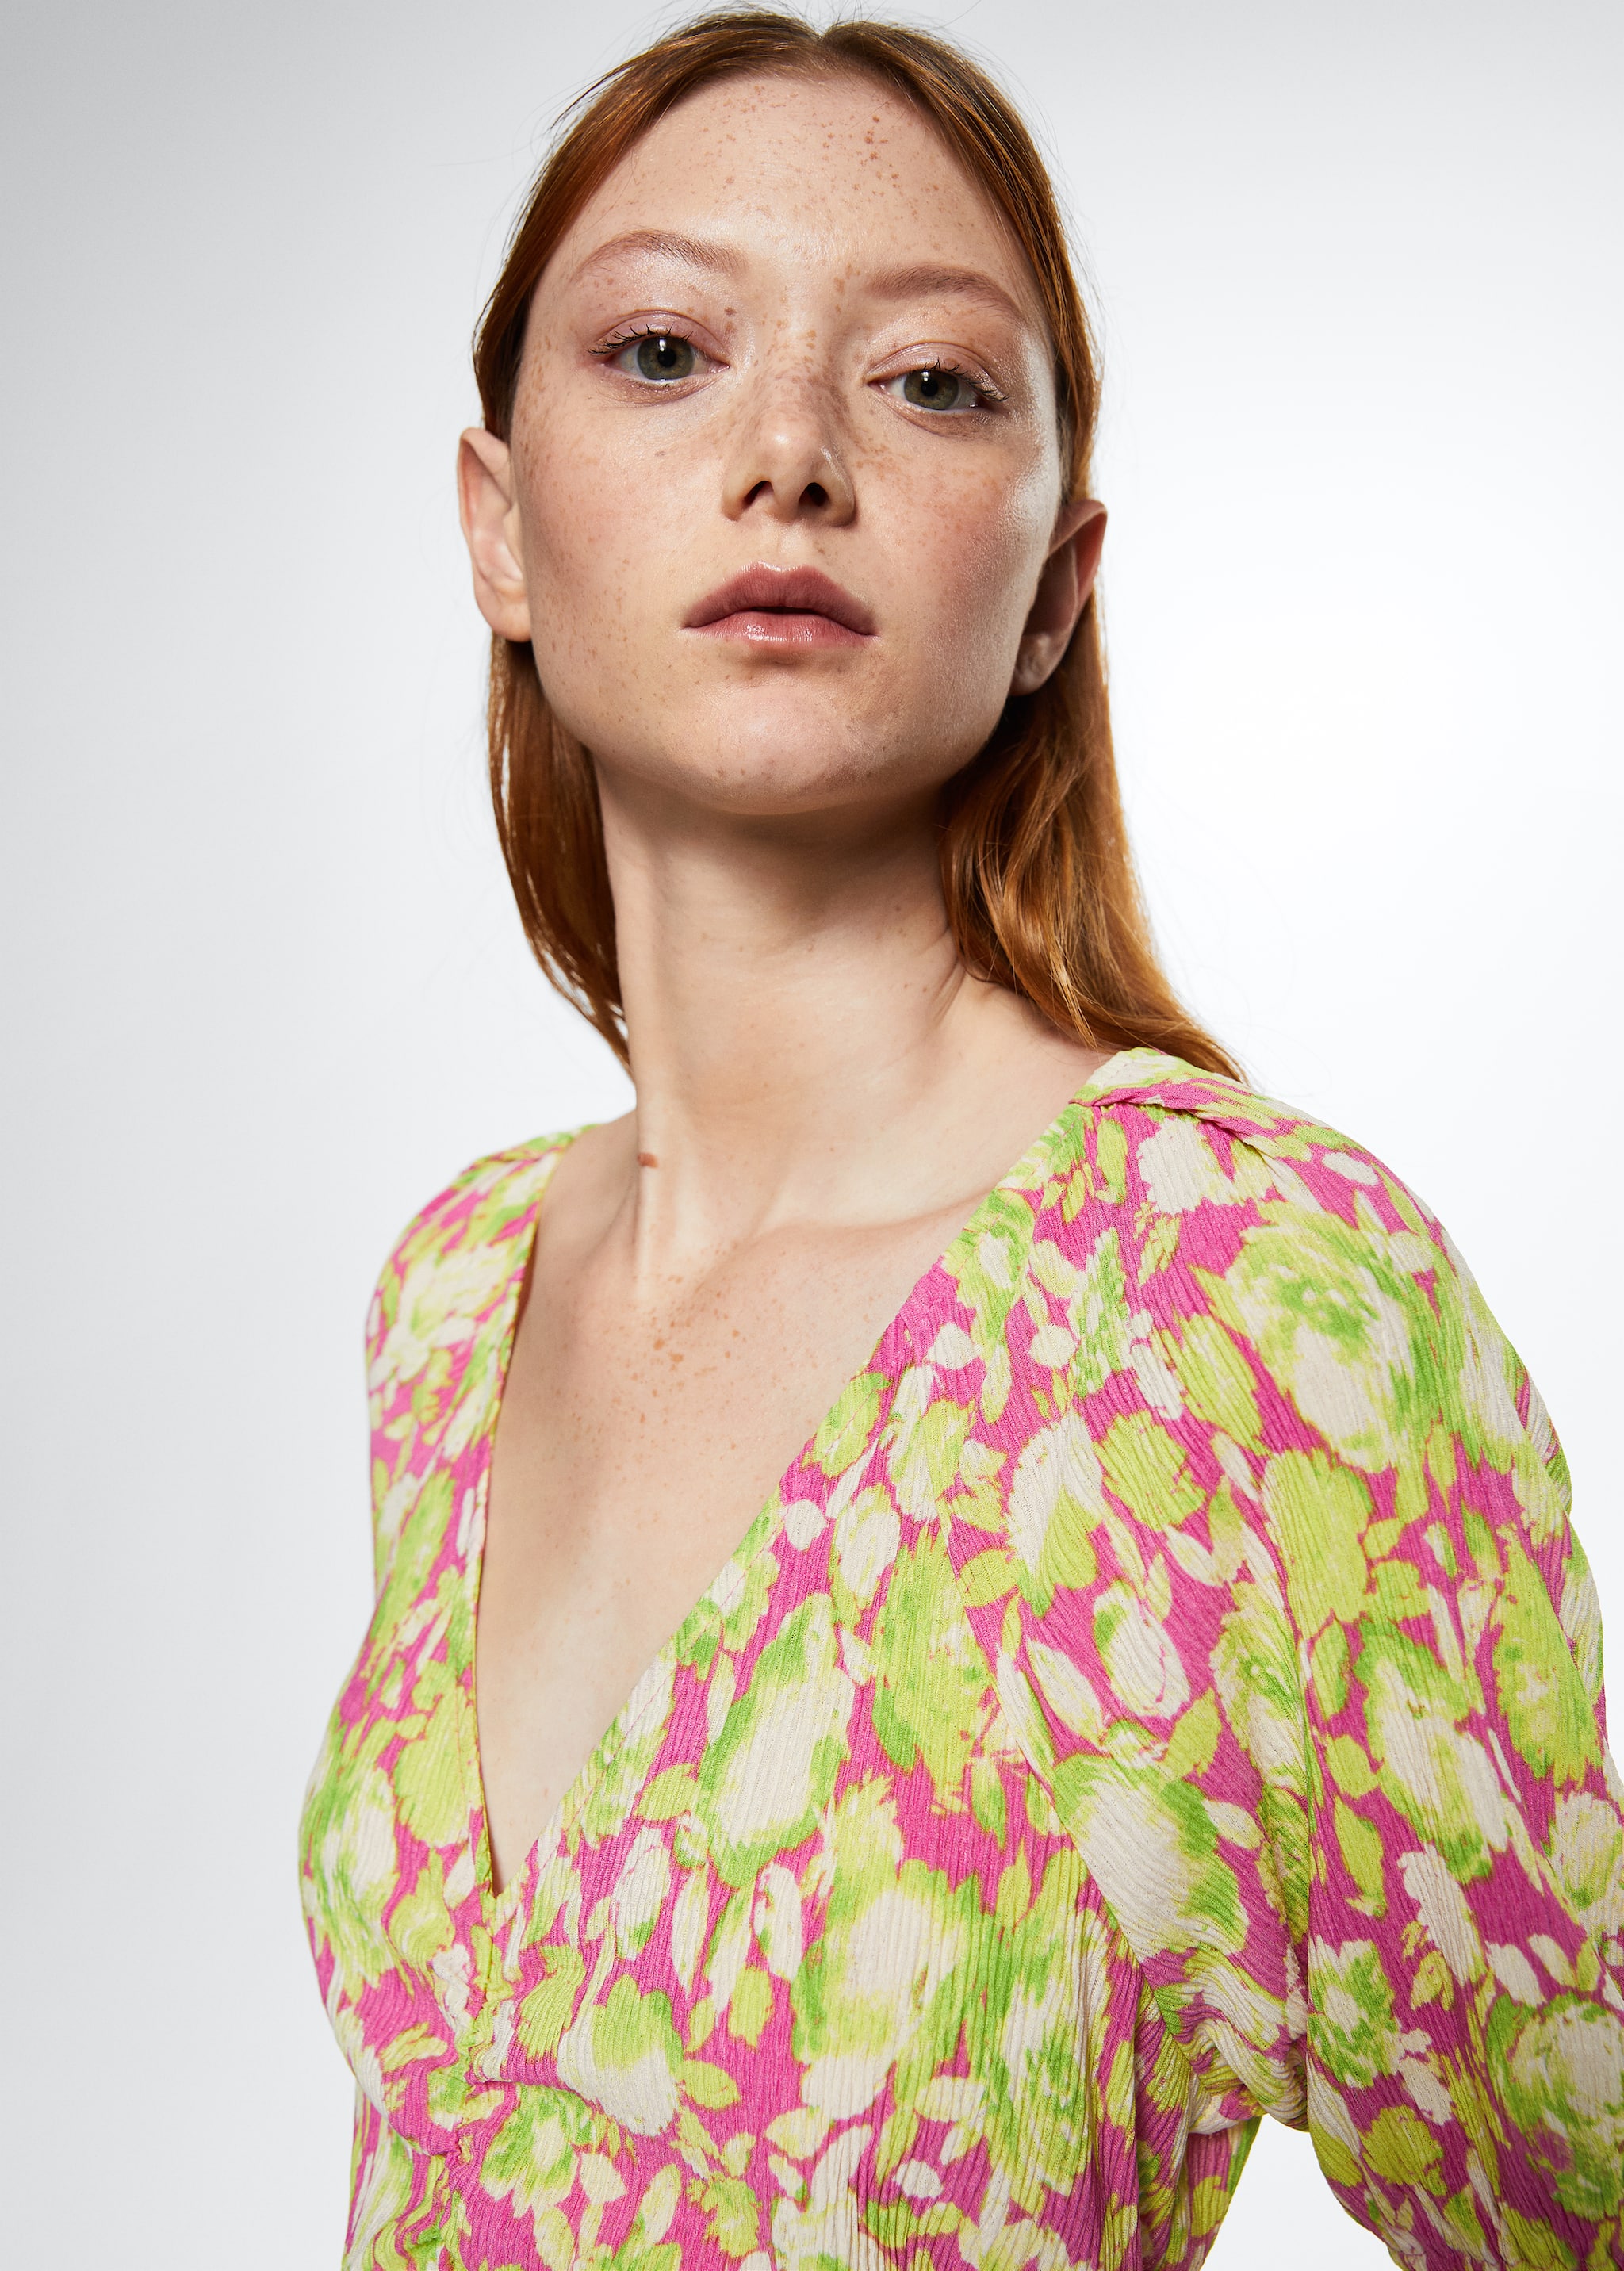 Floral print dress - Details of the article 1